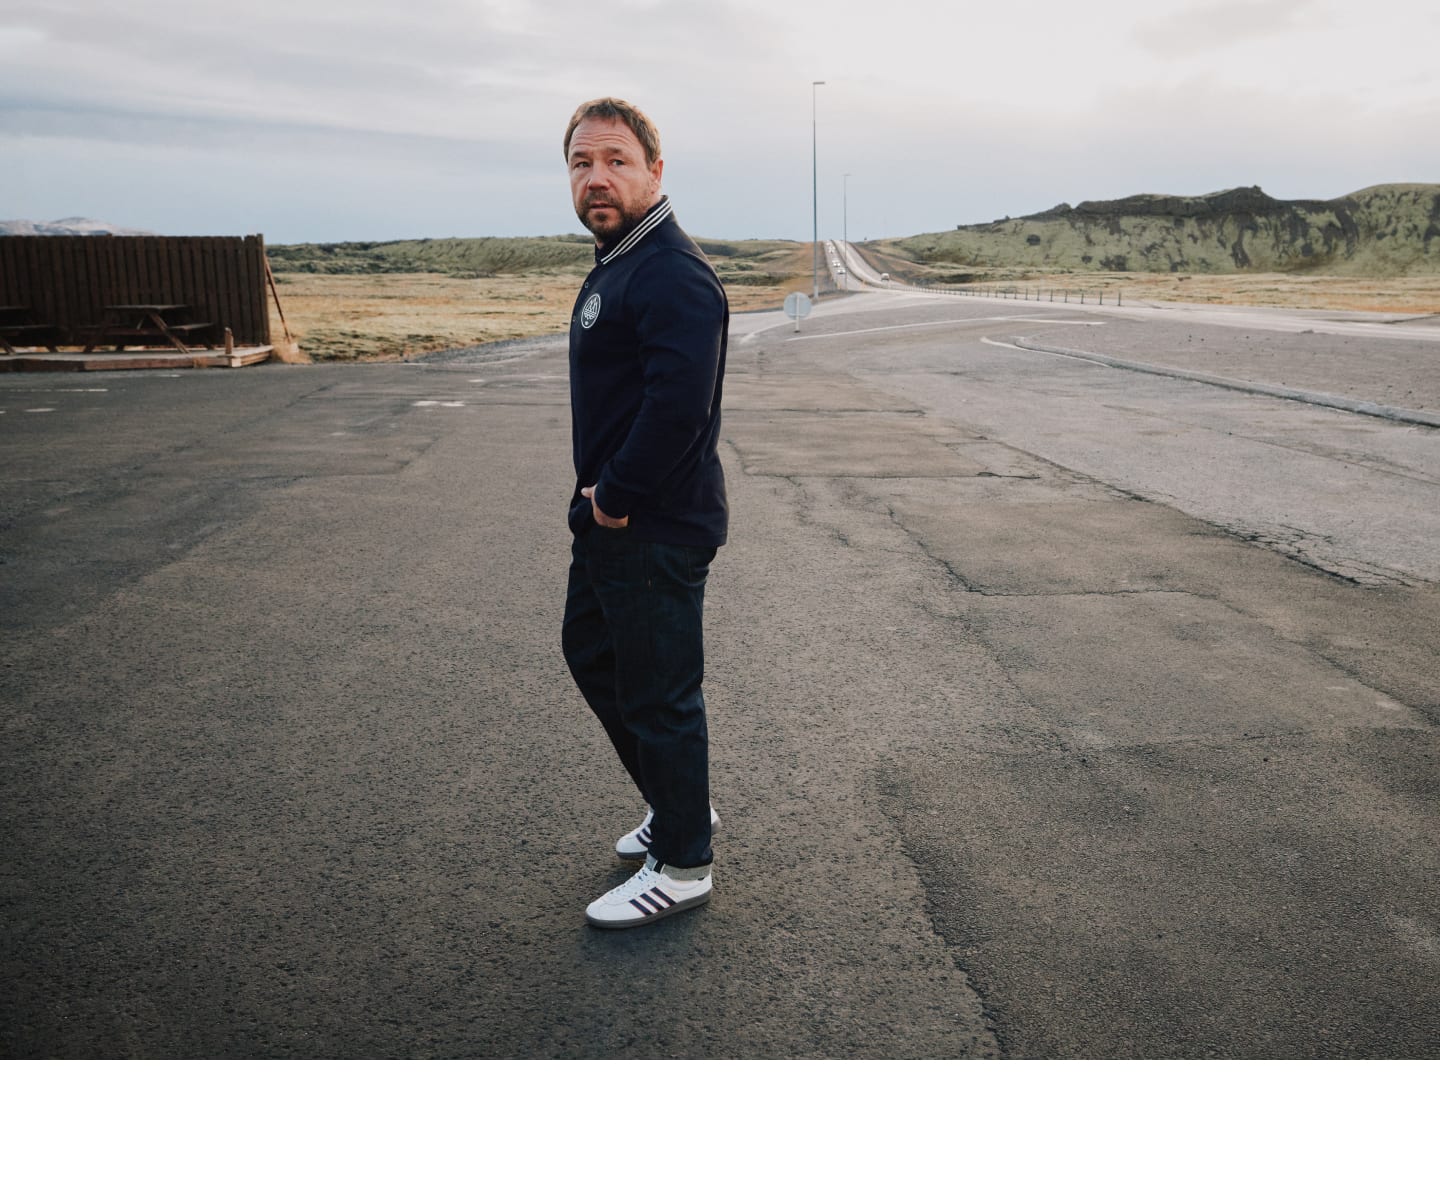 Stephen Graham walks on an asphalt road surrounded by empty fields, wearing a black jacket from the 2023 adidas Spezial collection.